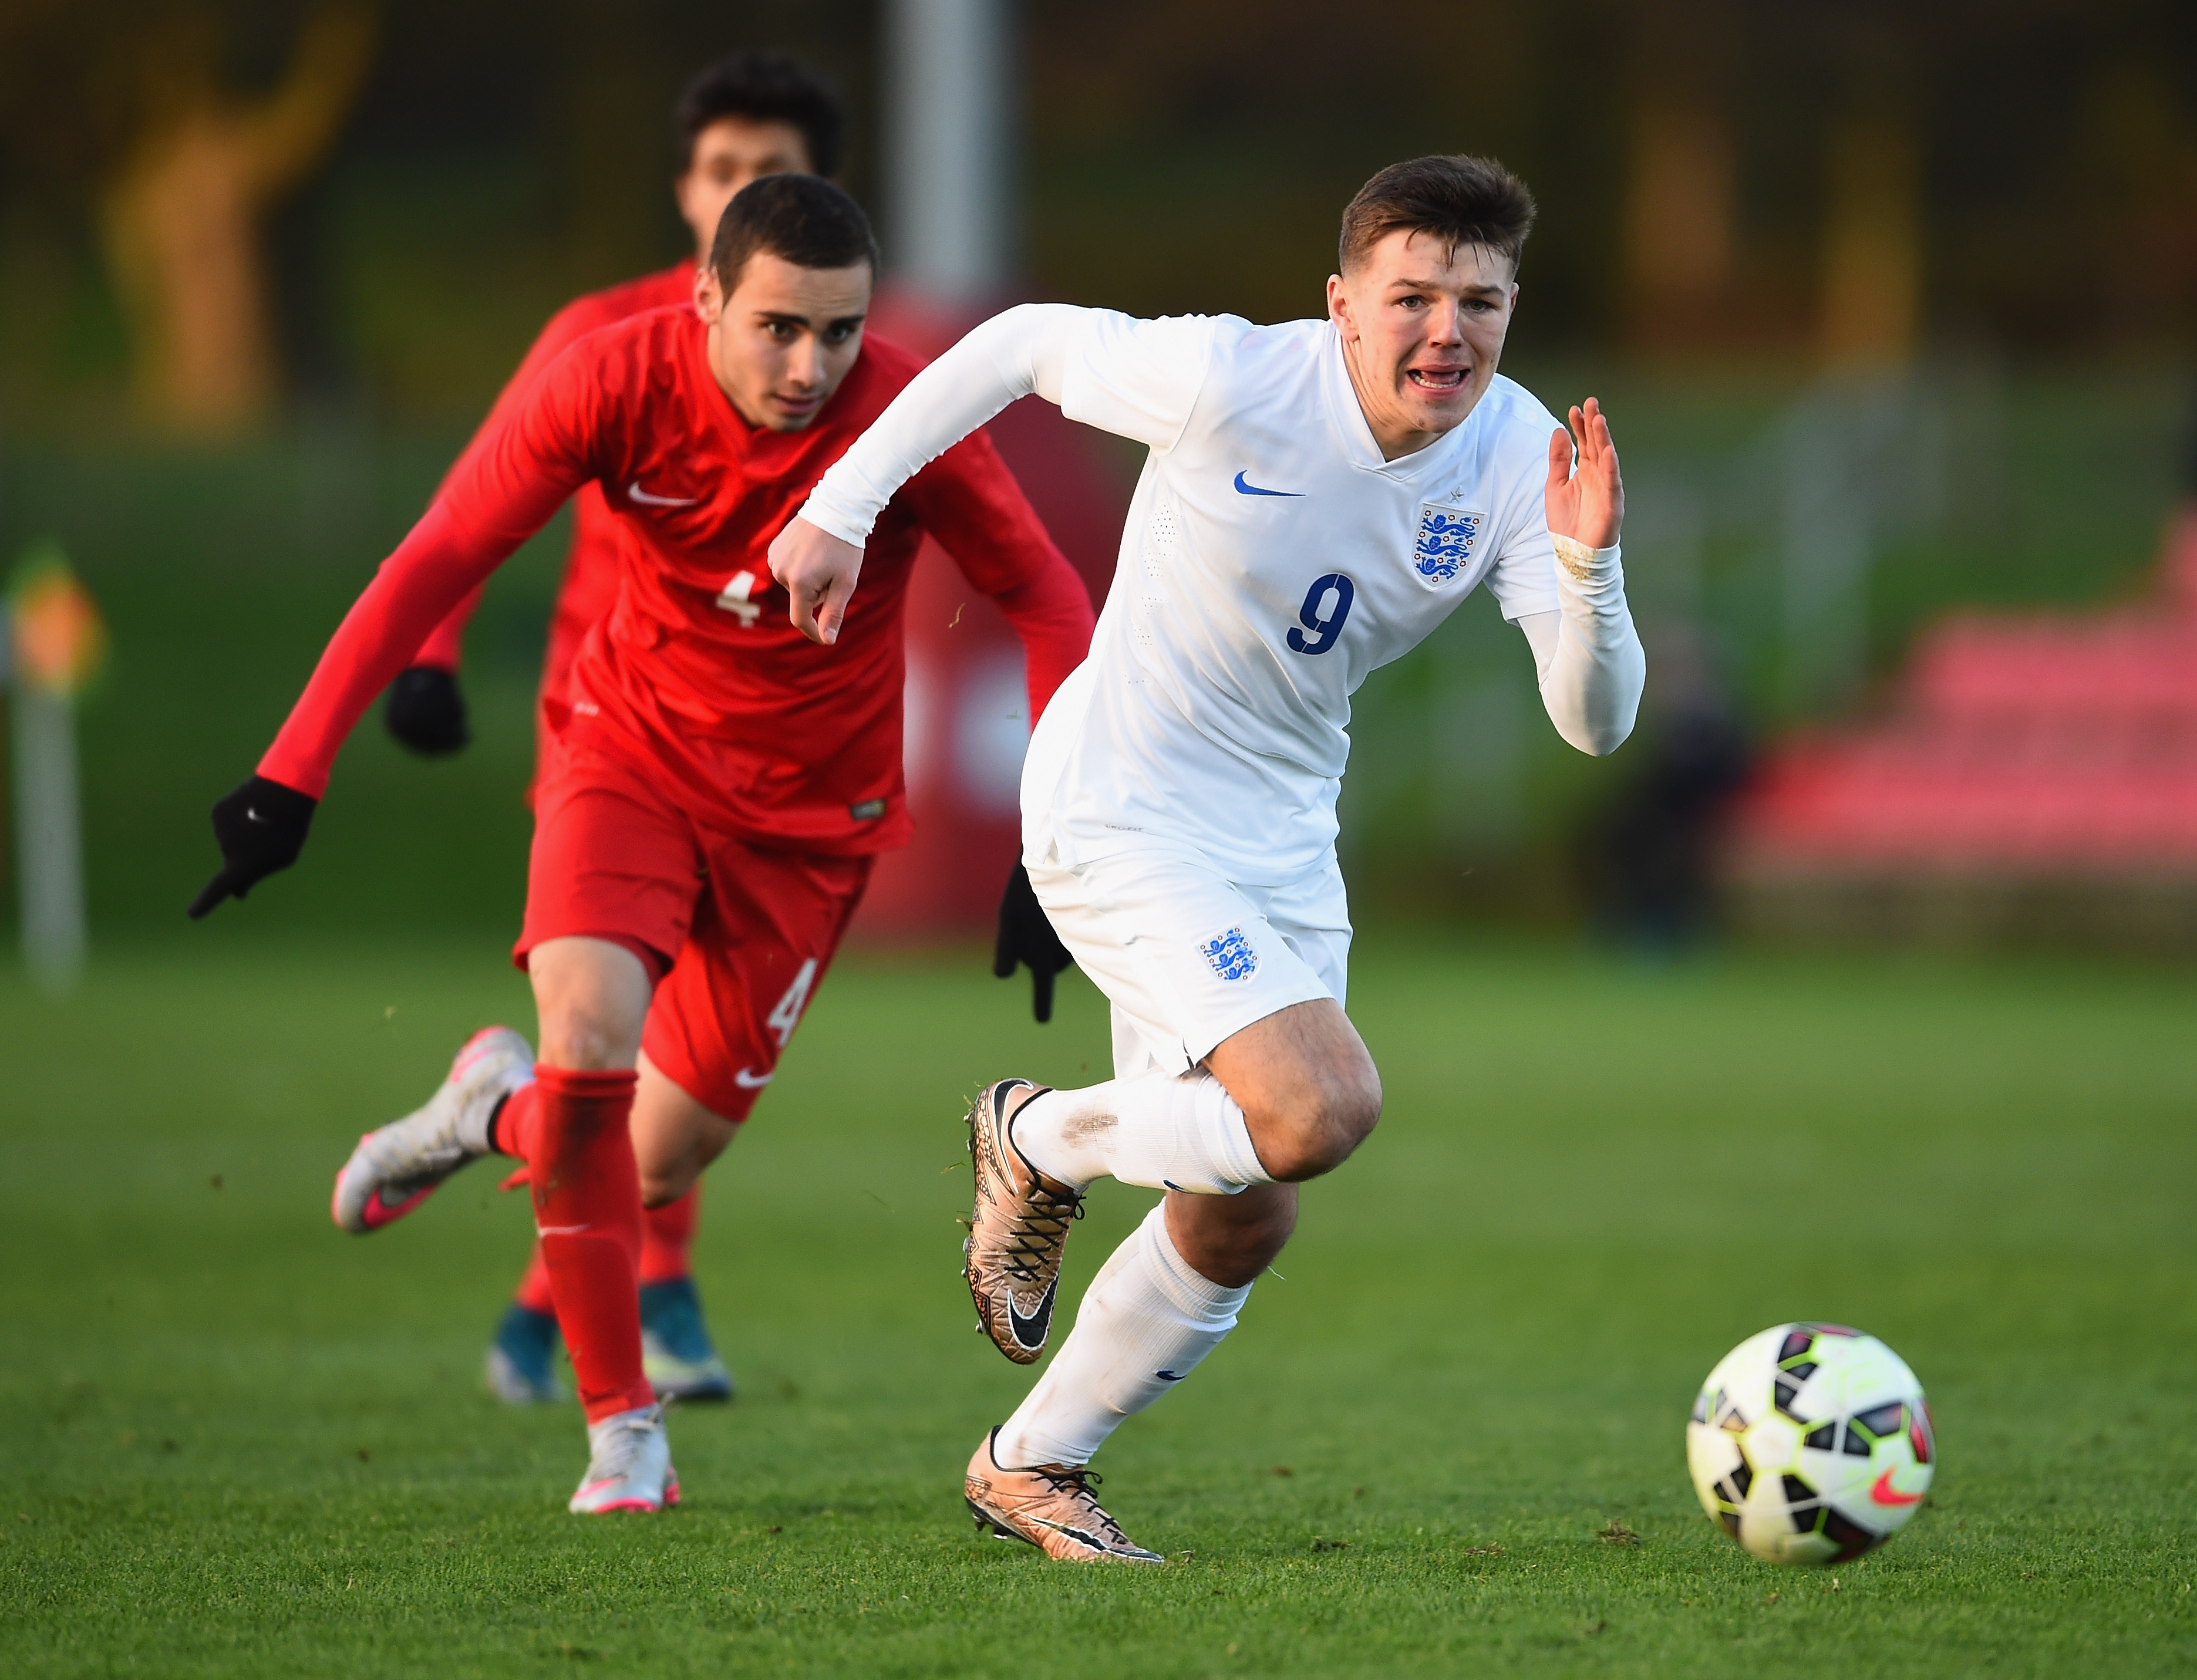 BURTON-UPON-TRENT, ENGLAND - DECEMBER 21:  Bobby Duncan of England in action during the International Friendly match between England U15 and Turkey U15 at St George's Park on December 21, 2015 in Burton-upon-Trent, England.  (Photo by Laurence Griffiths/Getty Images)